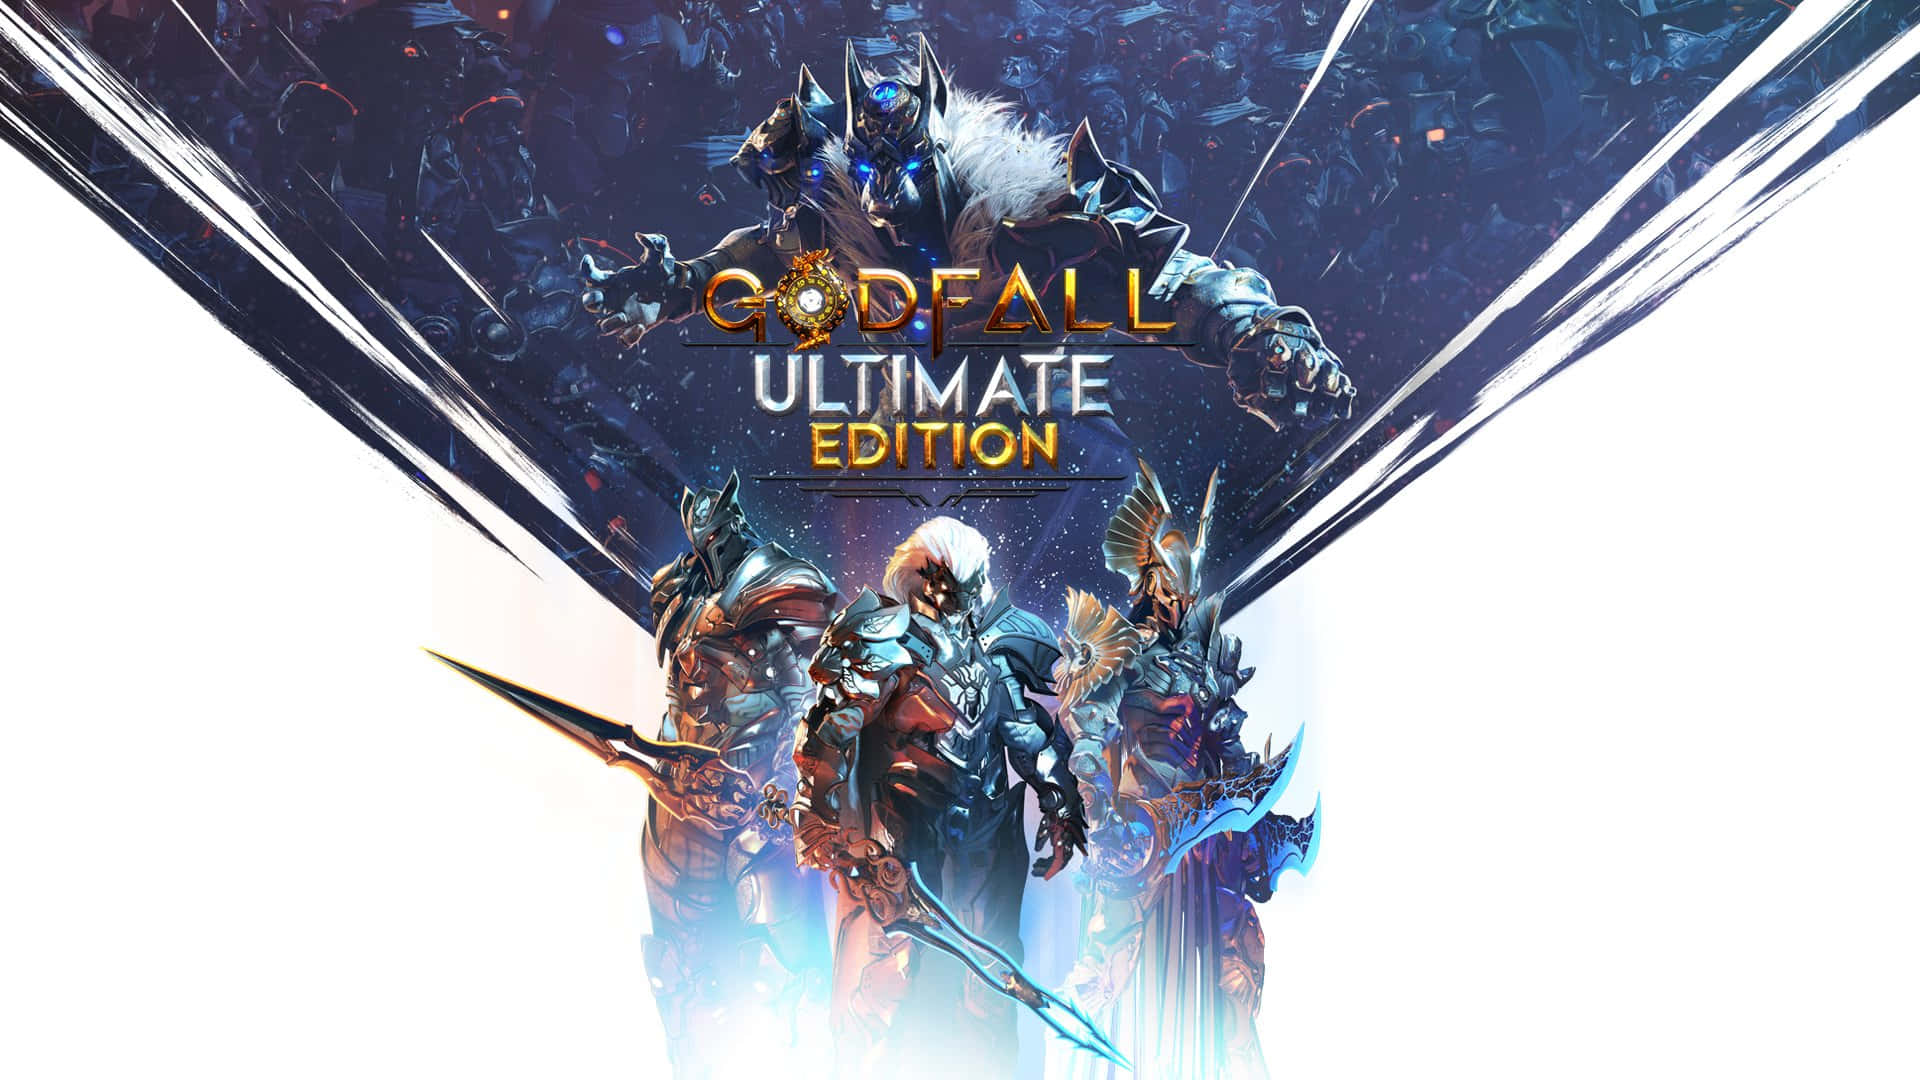 The Cover Of The Game, Dwarvenfall Ultimate Edition